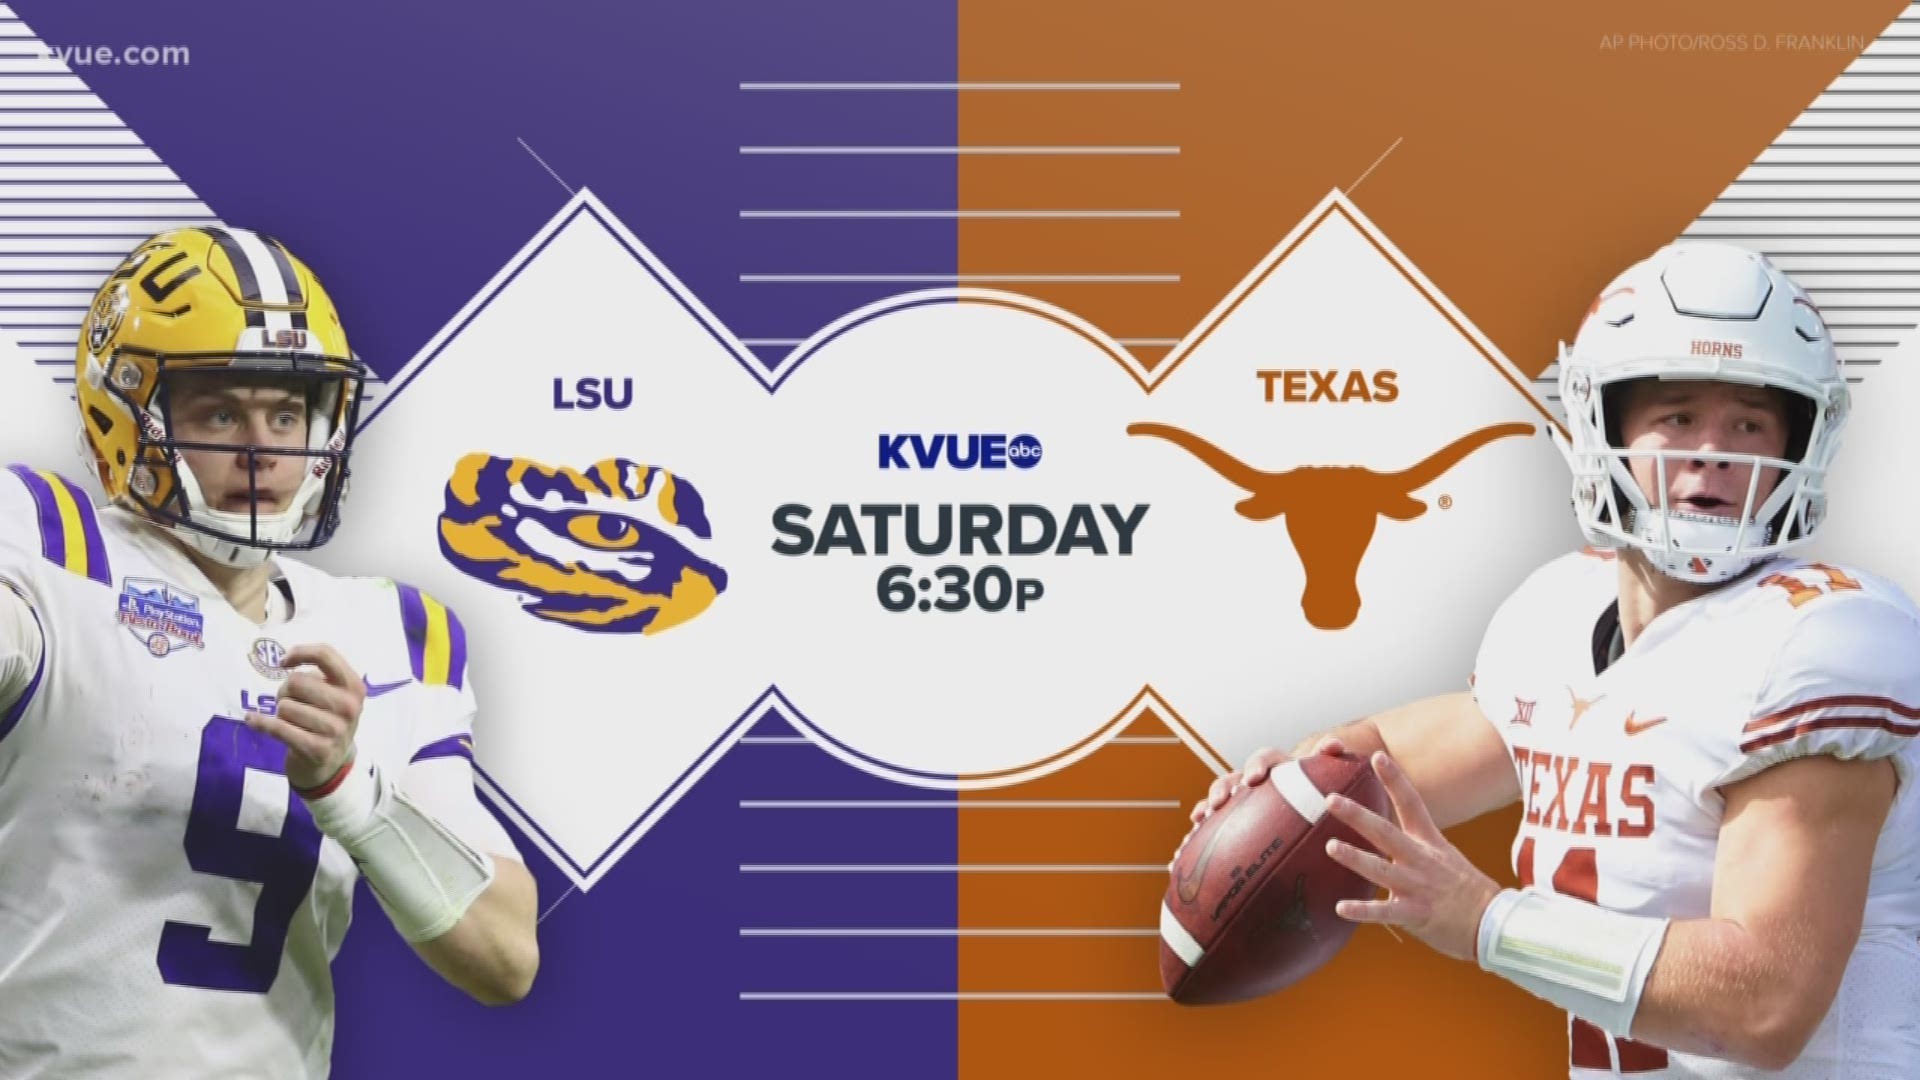 The price of tickets to the Texas v. LSU game cost over $300.